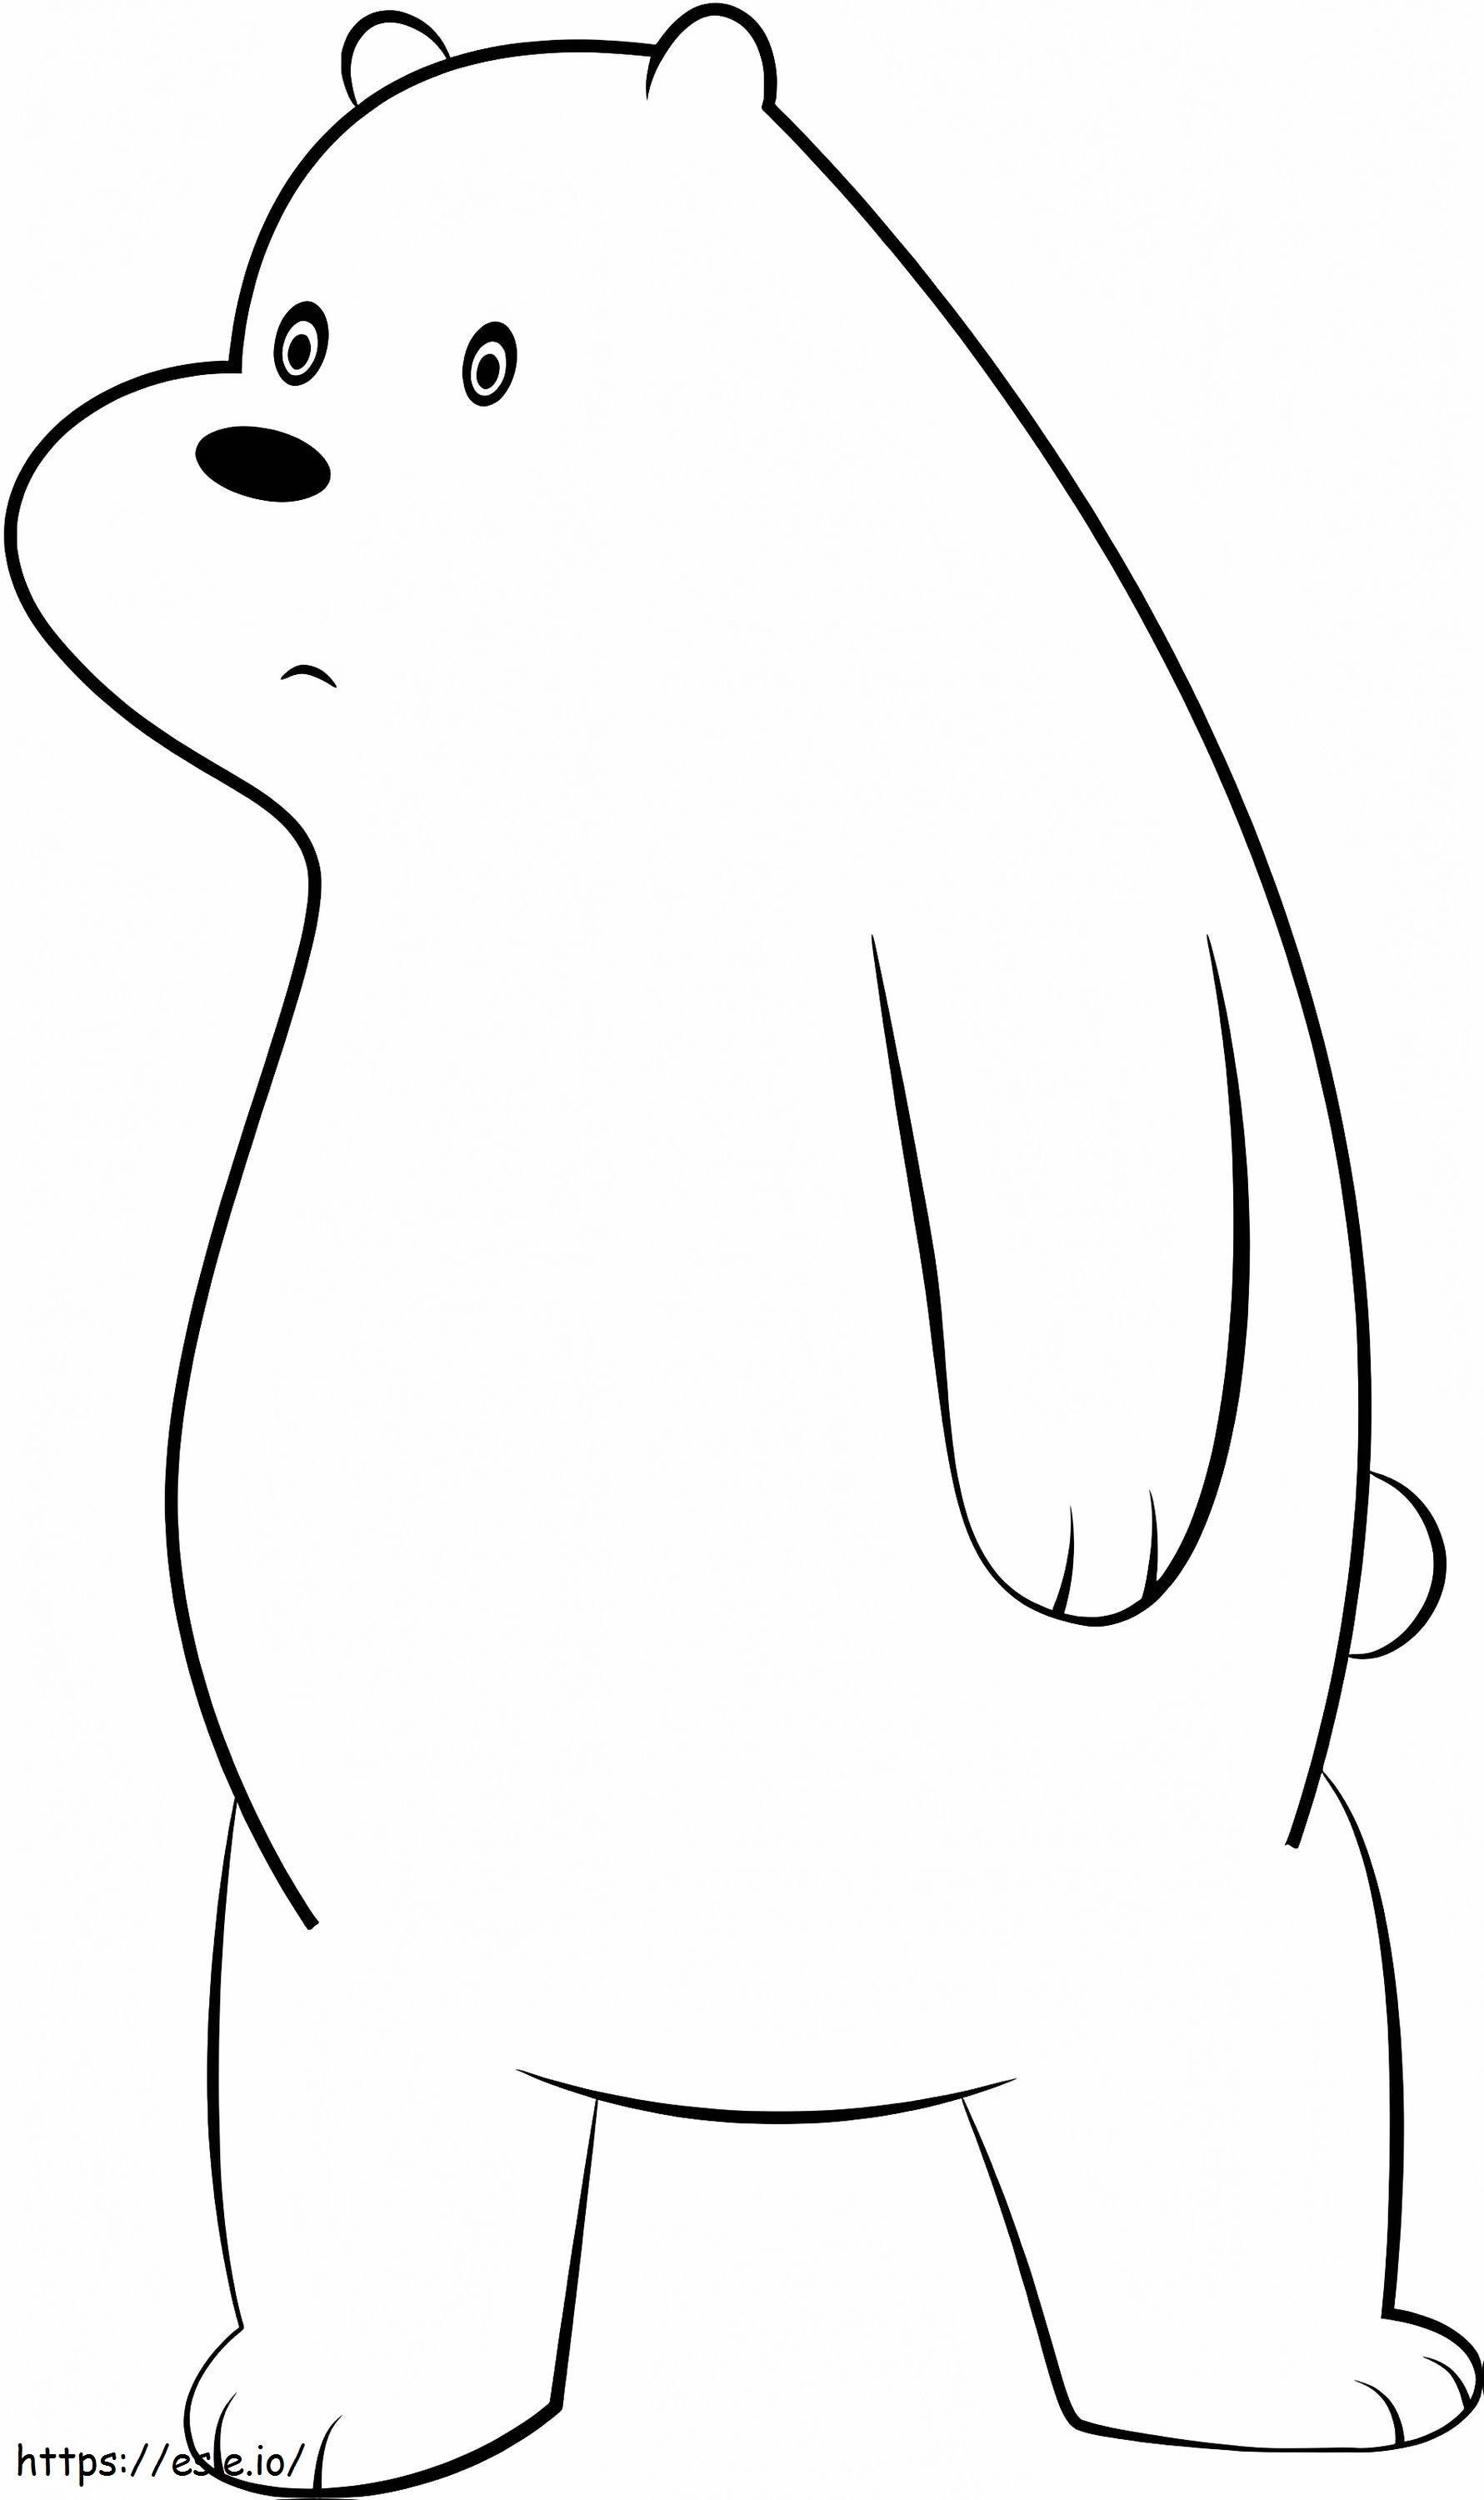 Awesome Ice Bear coloring page